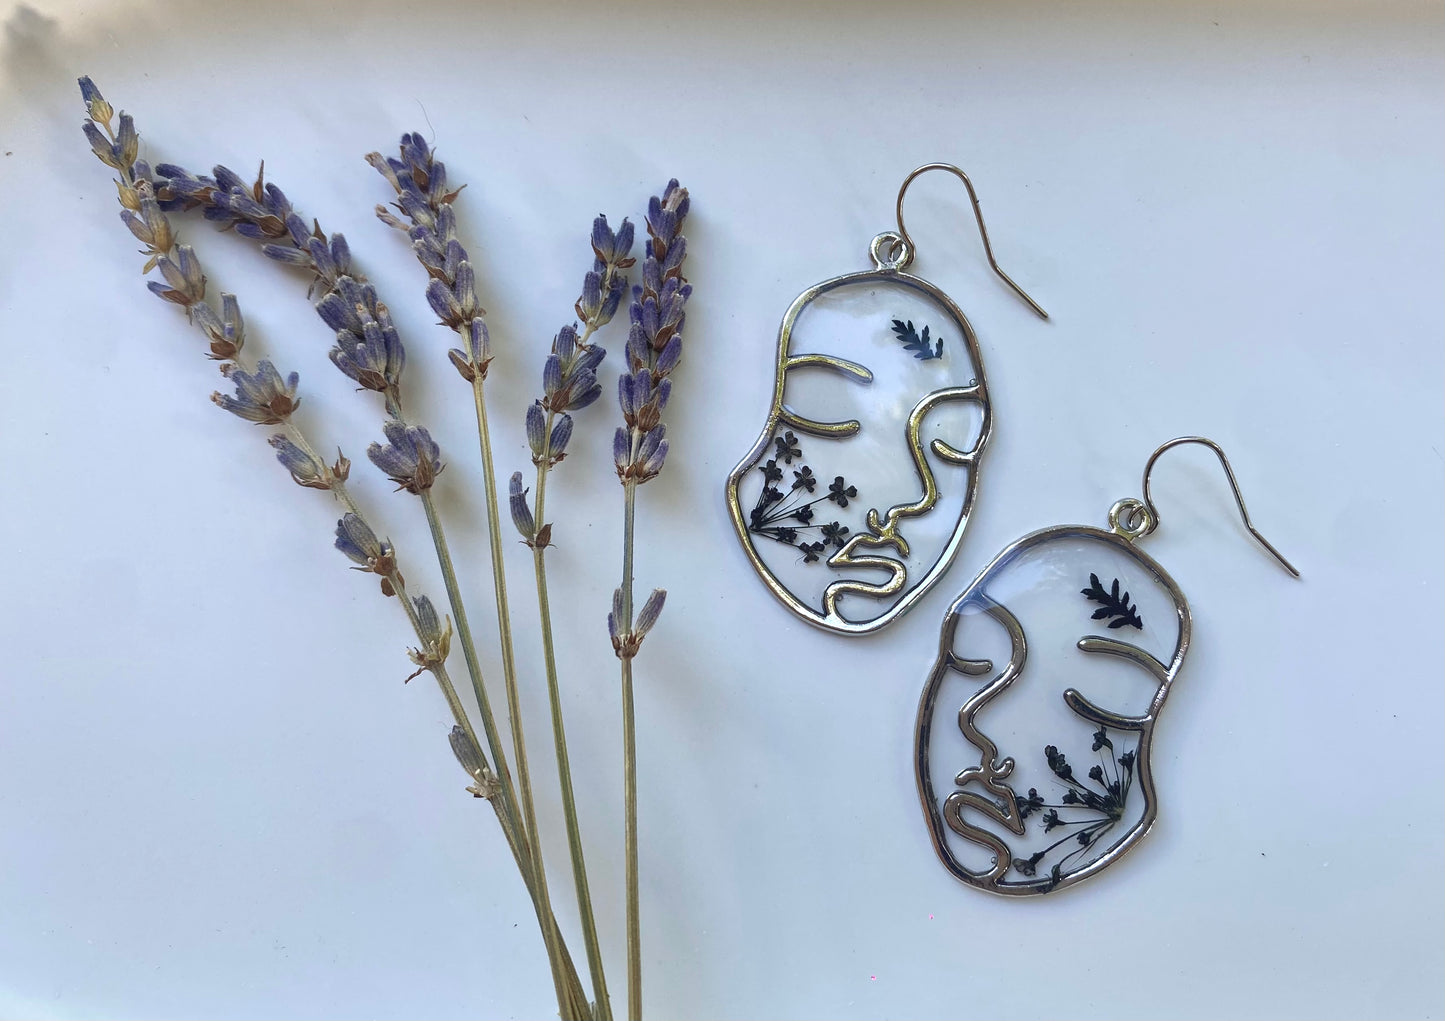 Handmade Black Fern Earrings. Abstract Silver Face earrings. Black Queen Anne’s lace and black ferns. 14K white gold plated